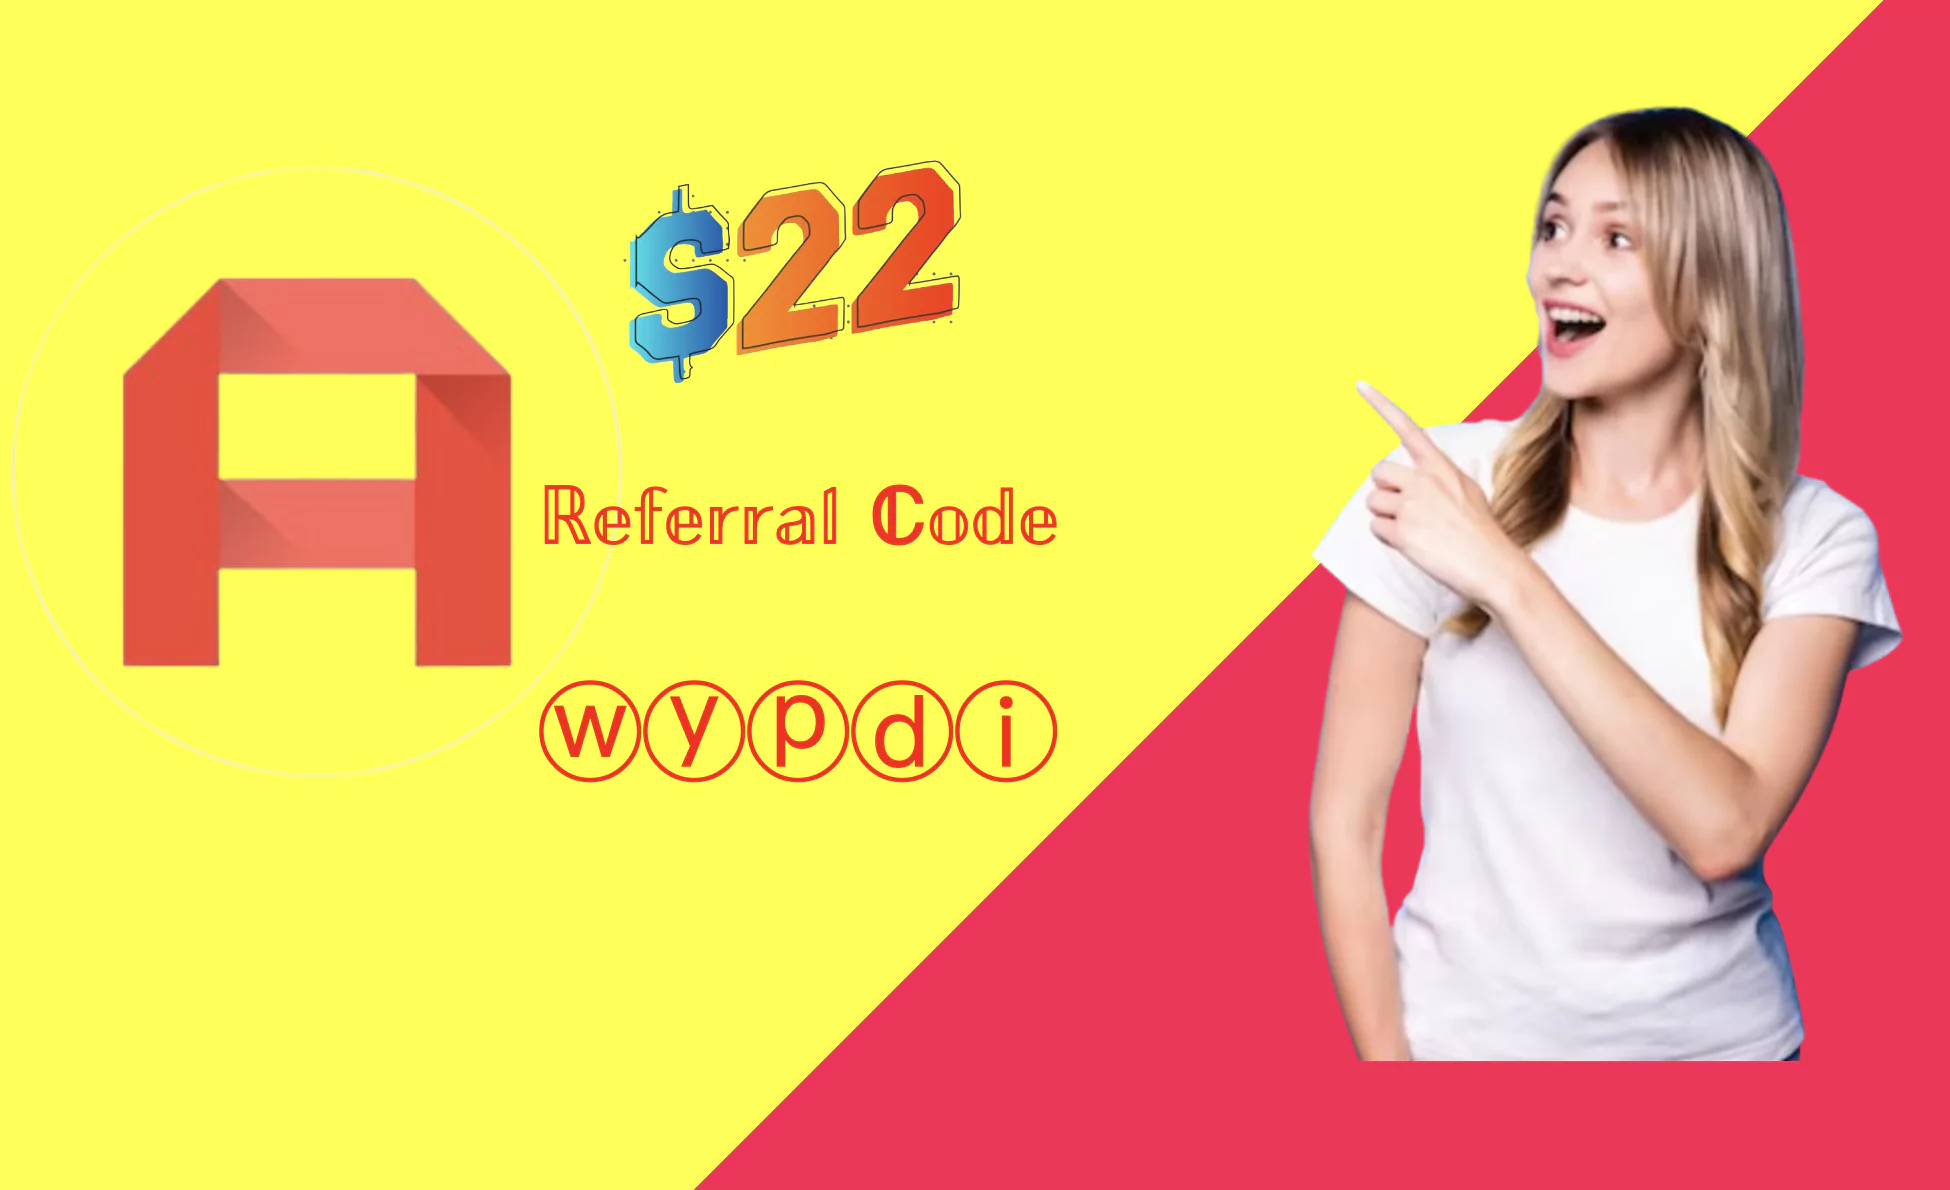 Official Attapoll Referral Code is wypdi